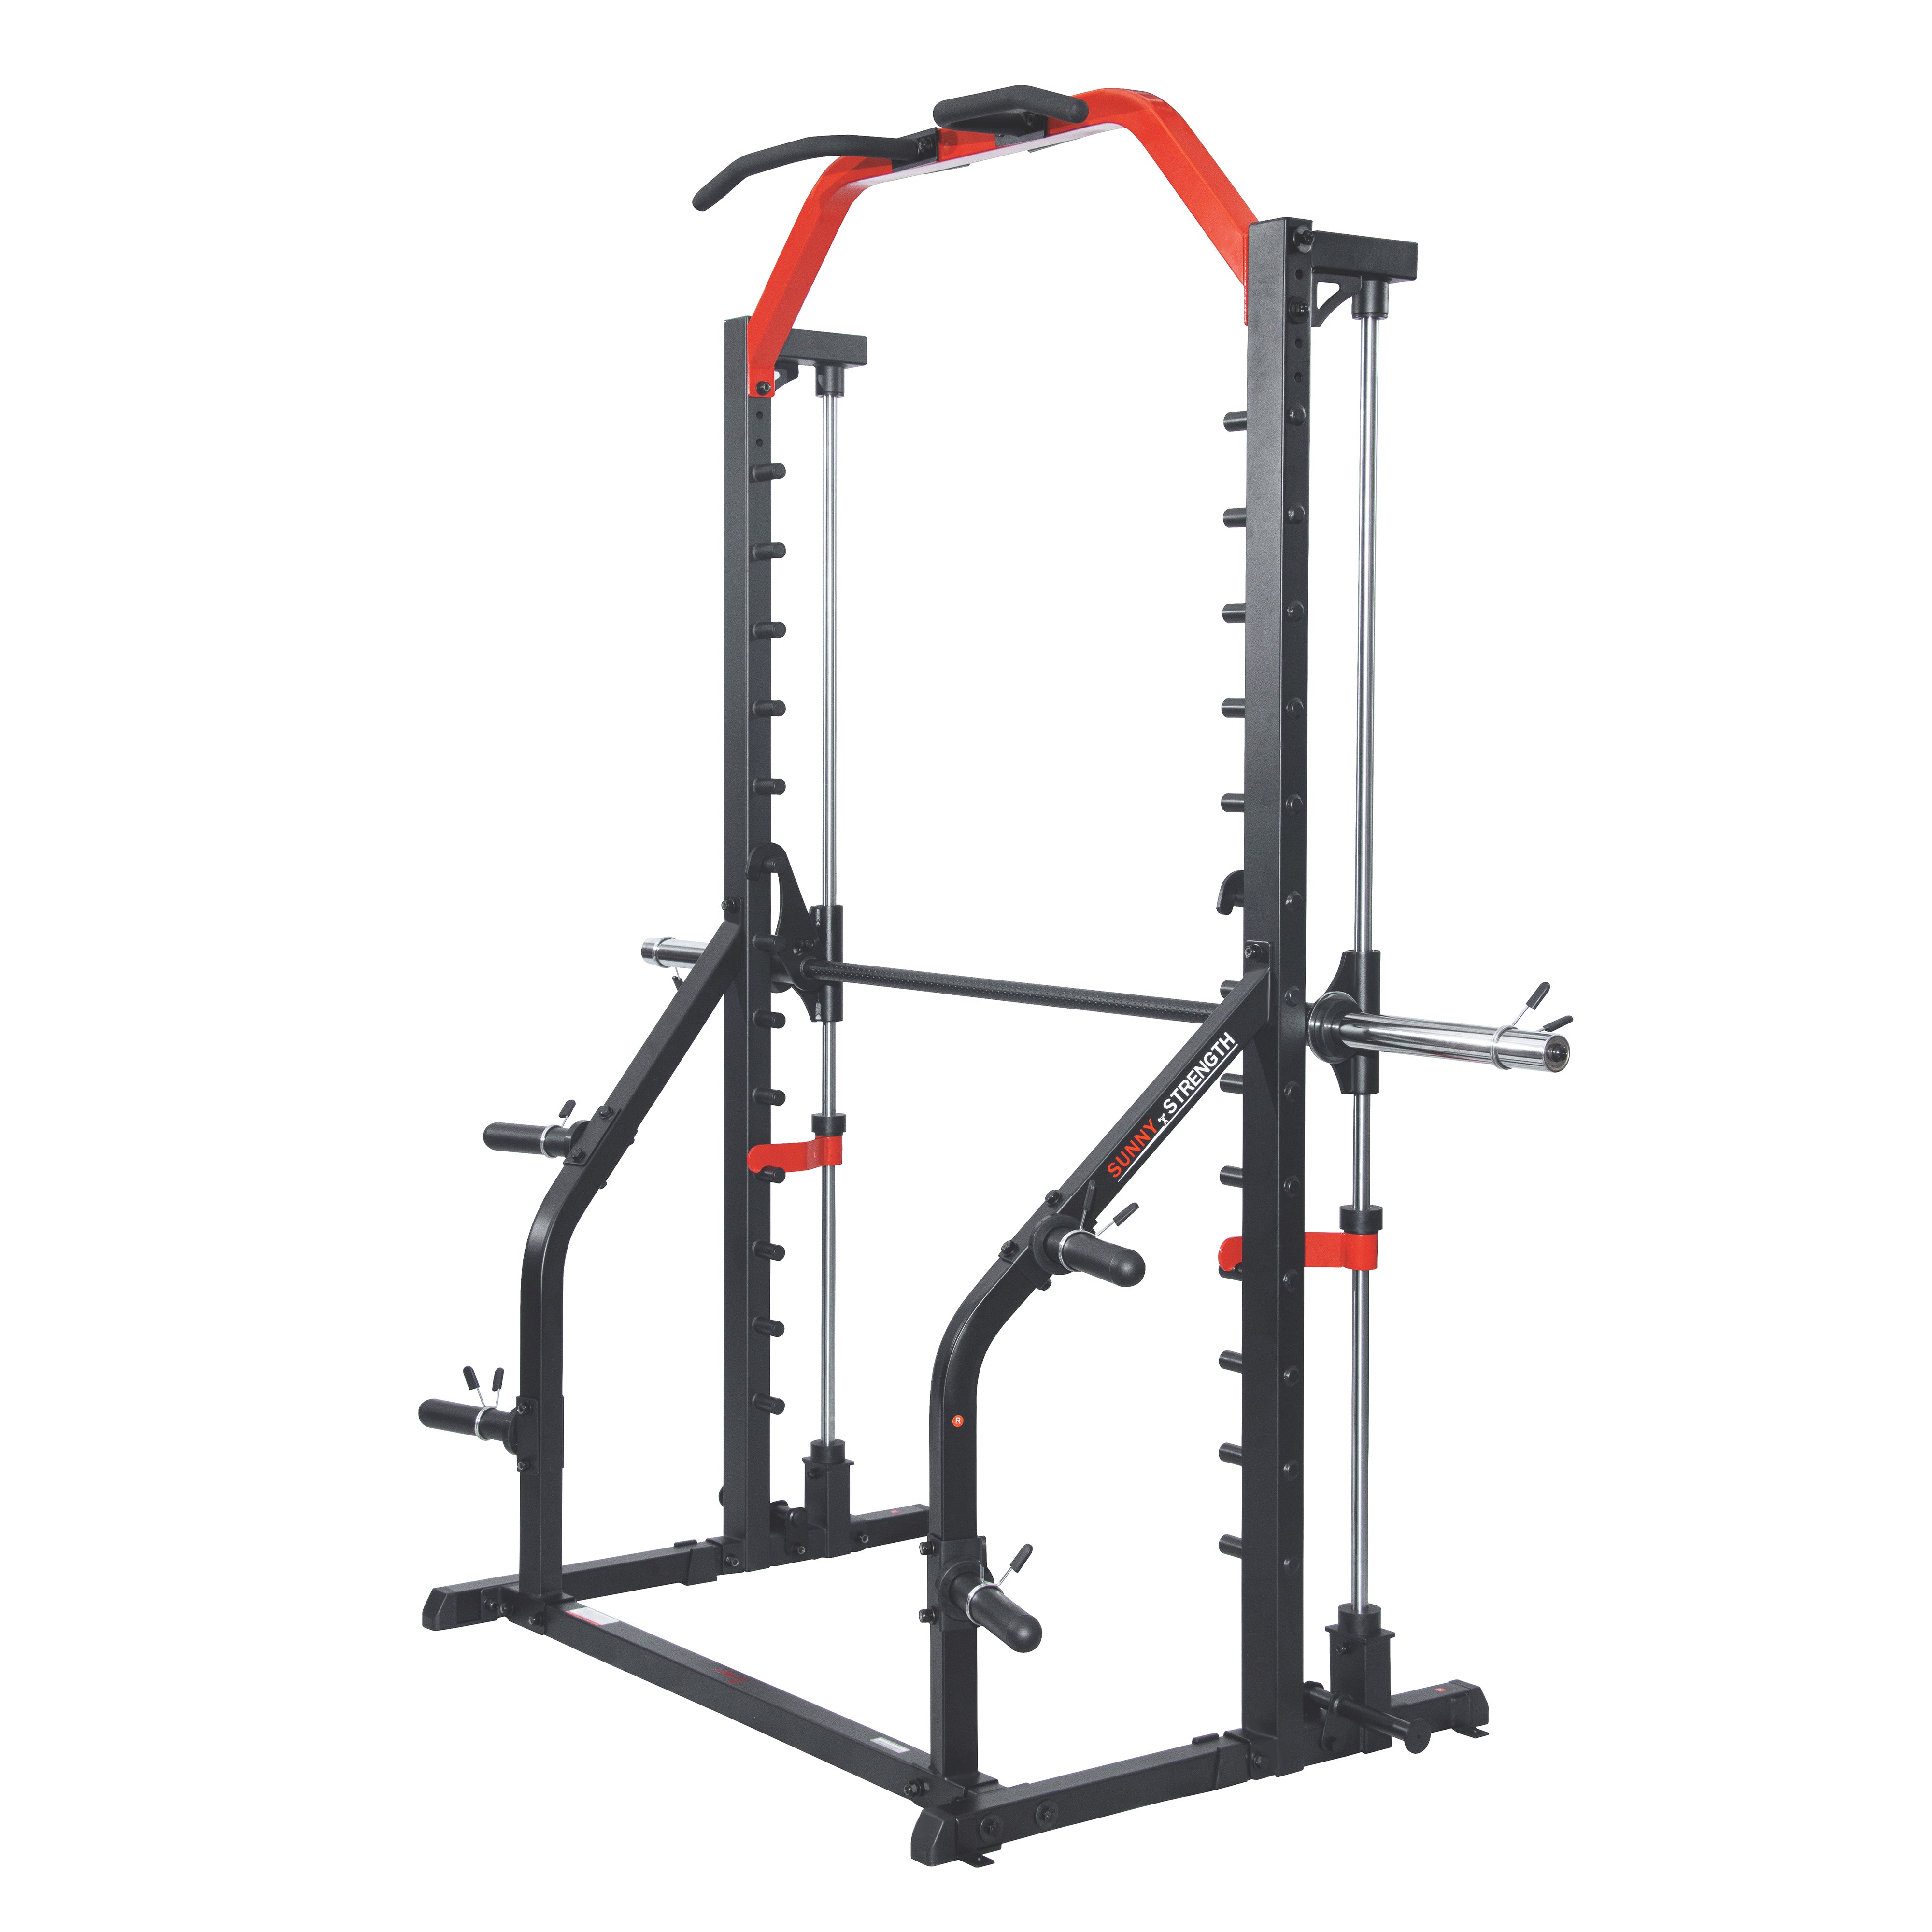 II Series | Smith Squat Sunny Machine Fitness Health Rack Essential and